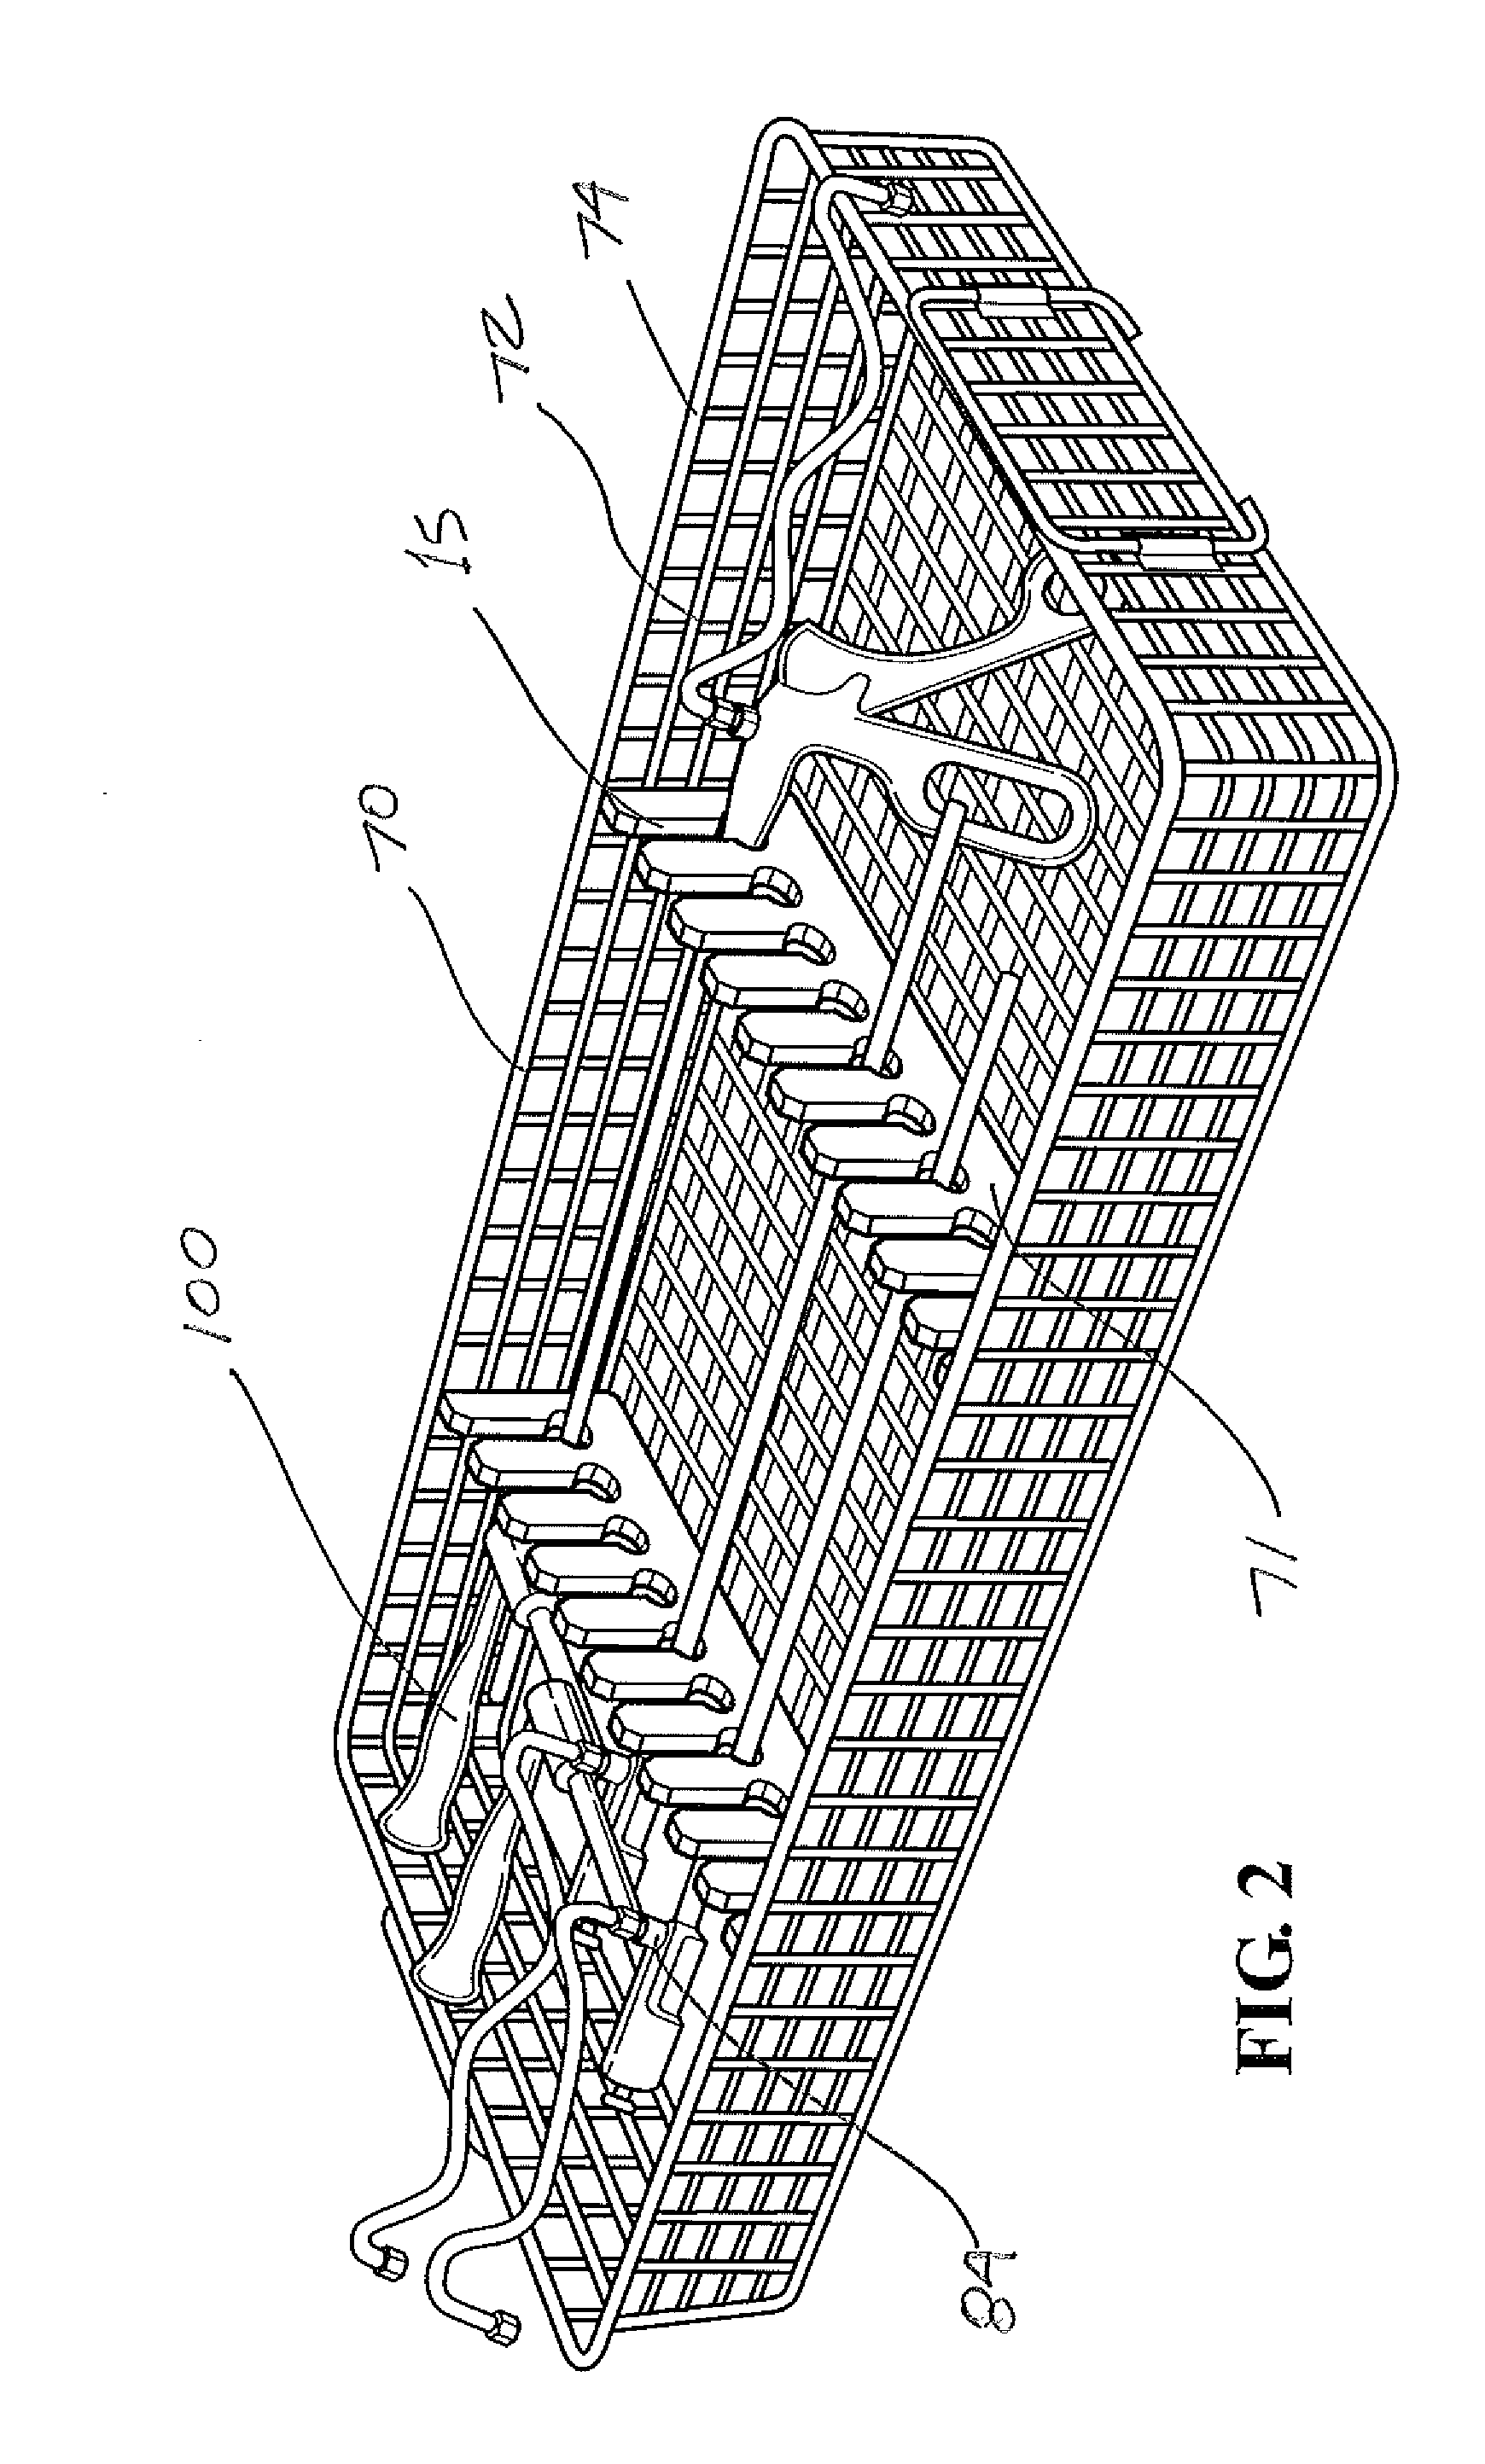 Method and apparatus for cleaning of laparoscopic surgical instruments